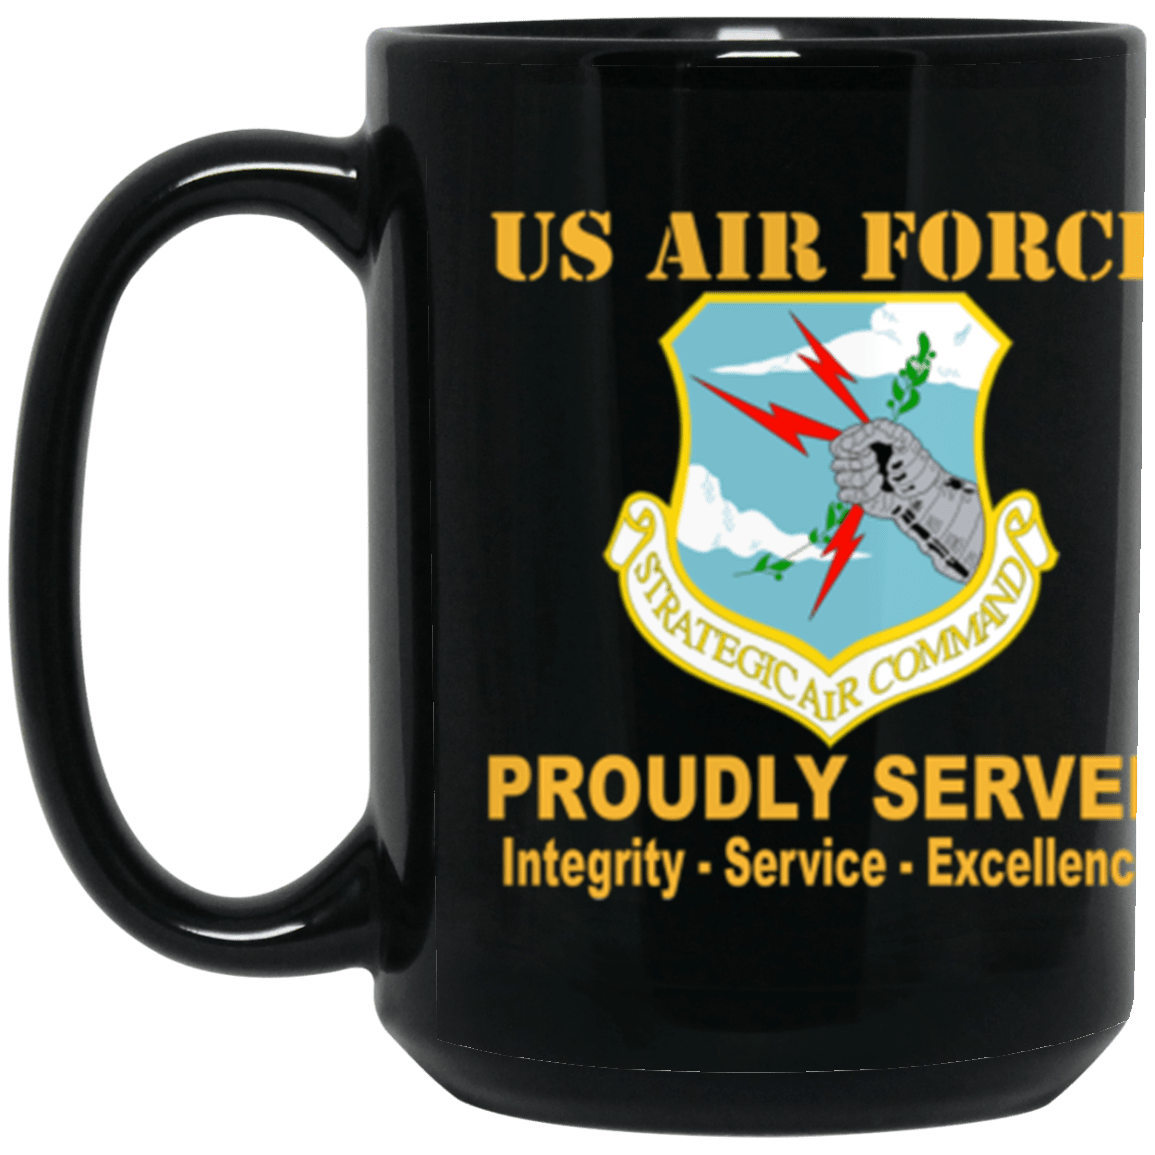 US Air Force Strategic Air Command Proudly Served Core Values 15 oz. Black Mug-Drinkware-Veterans Nation